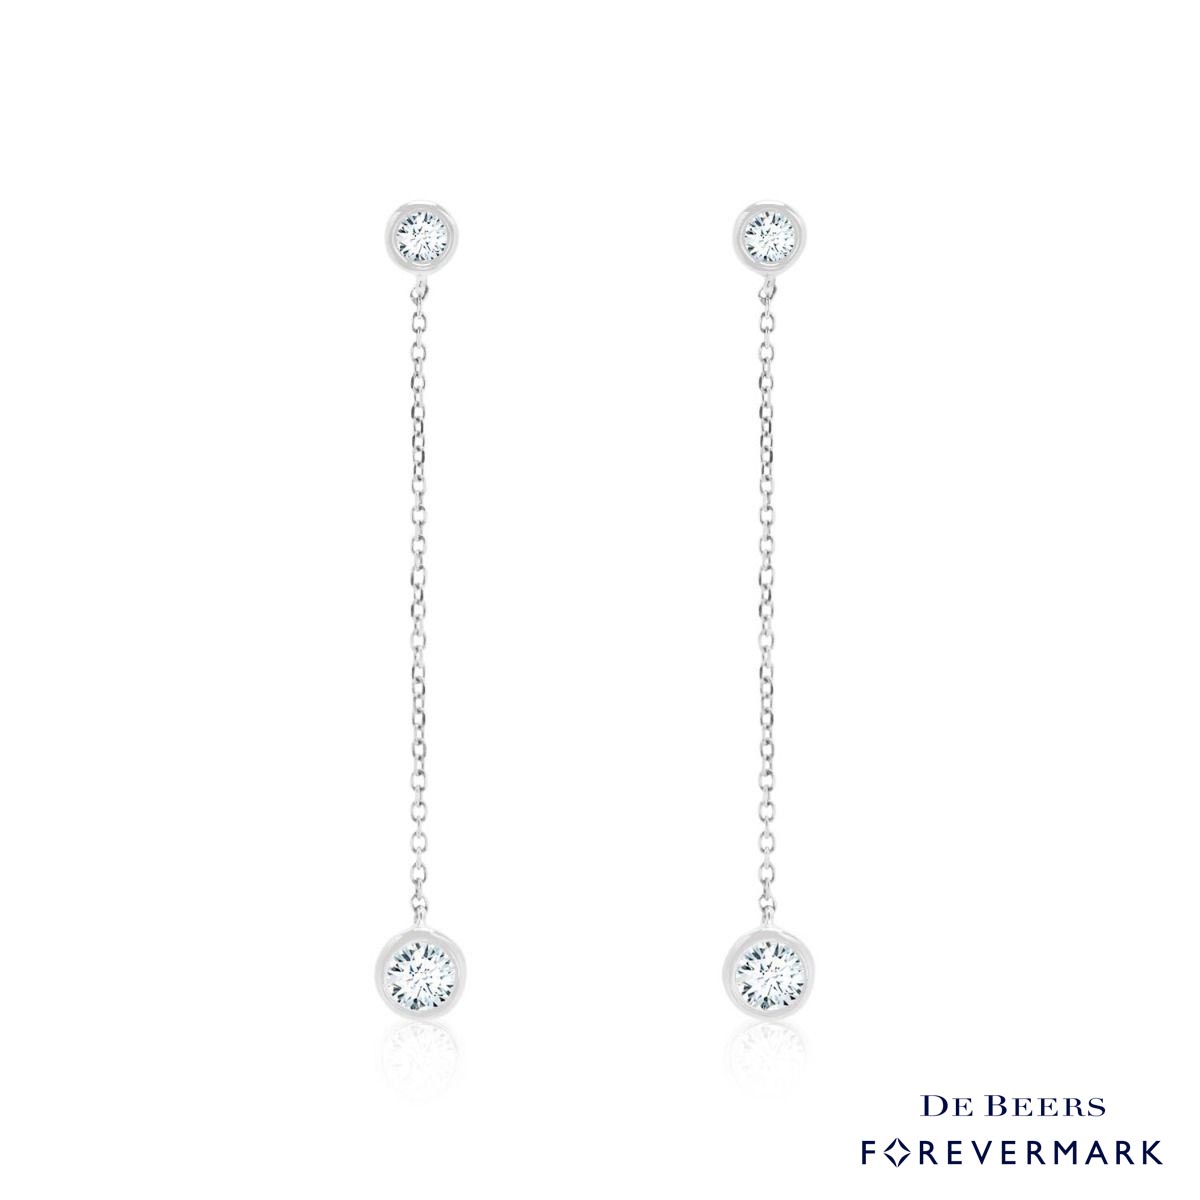 De Beers Forevermark Tribute Collection Diamond Drop Earrings in 18kt White Gold (1/3ct tw)